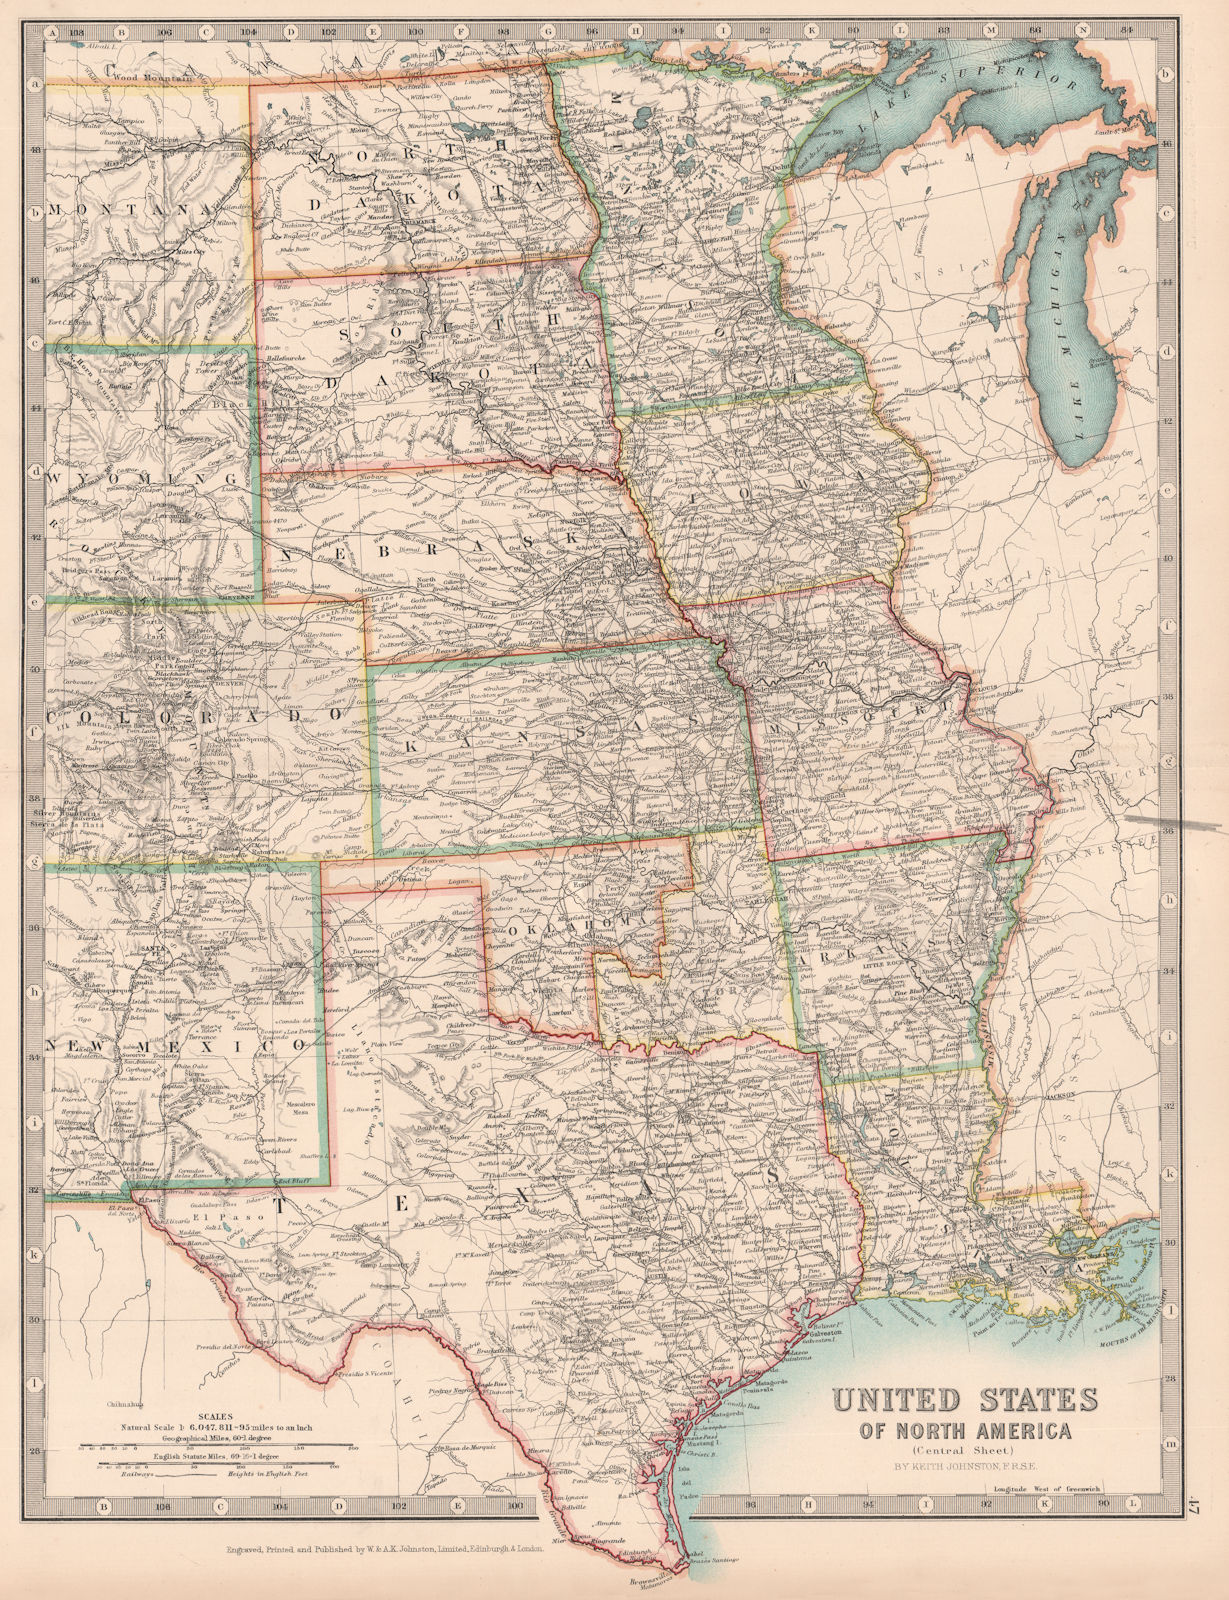 Associate Product USA CENTRAL. Shows "Indian Territory" within Oklahoma. Texas. JOHNSTON 1906 map